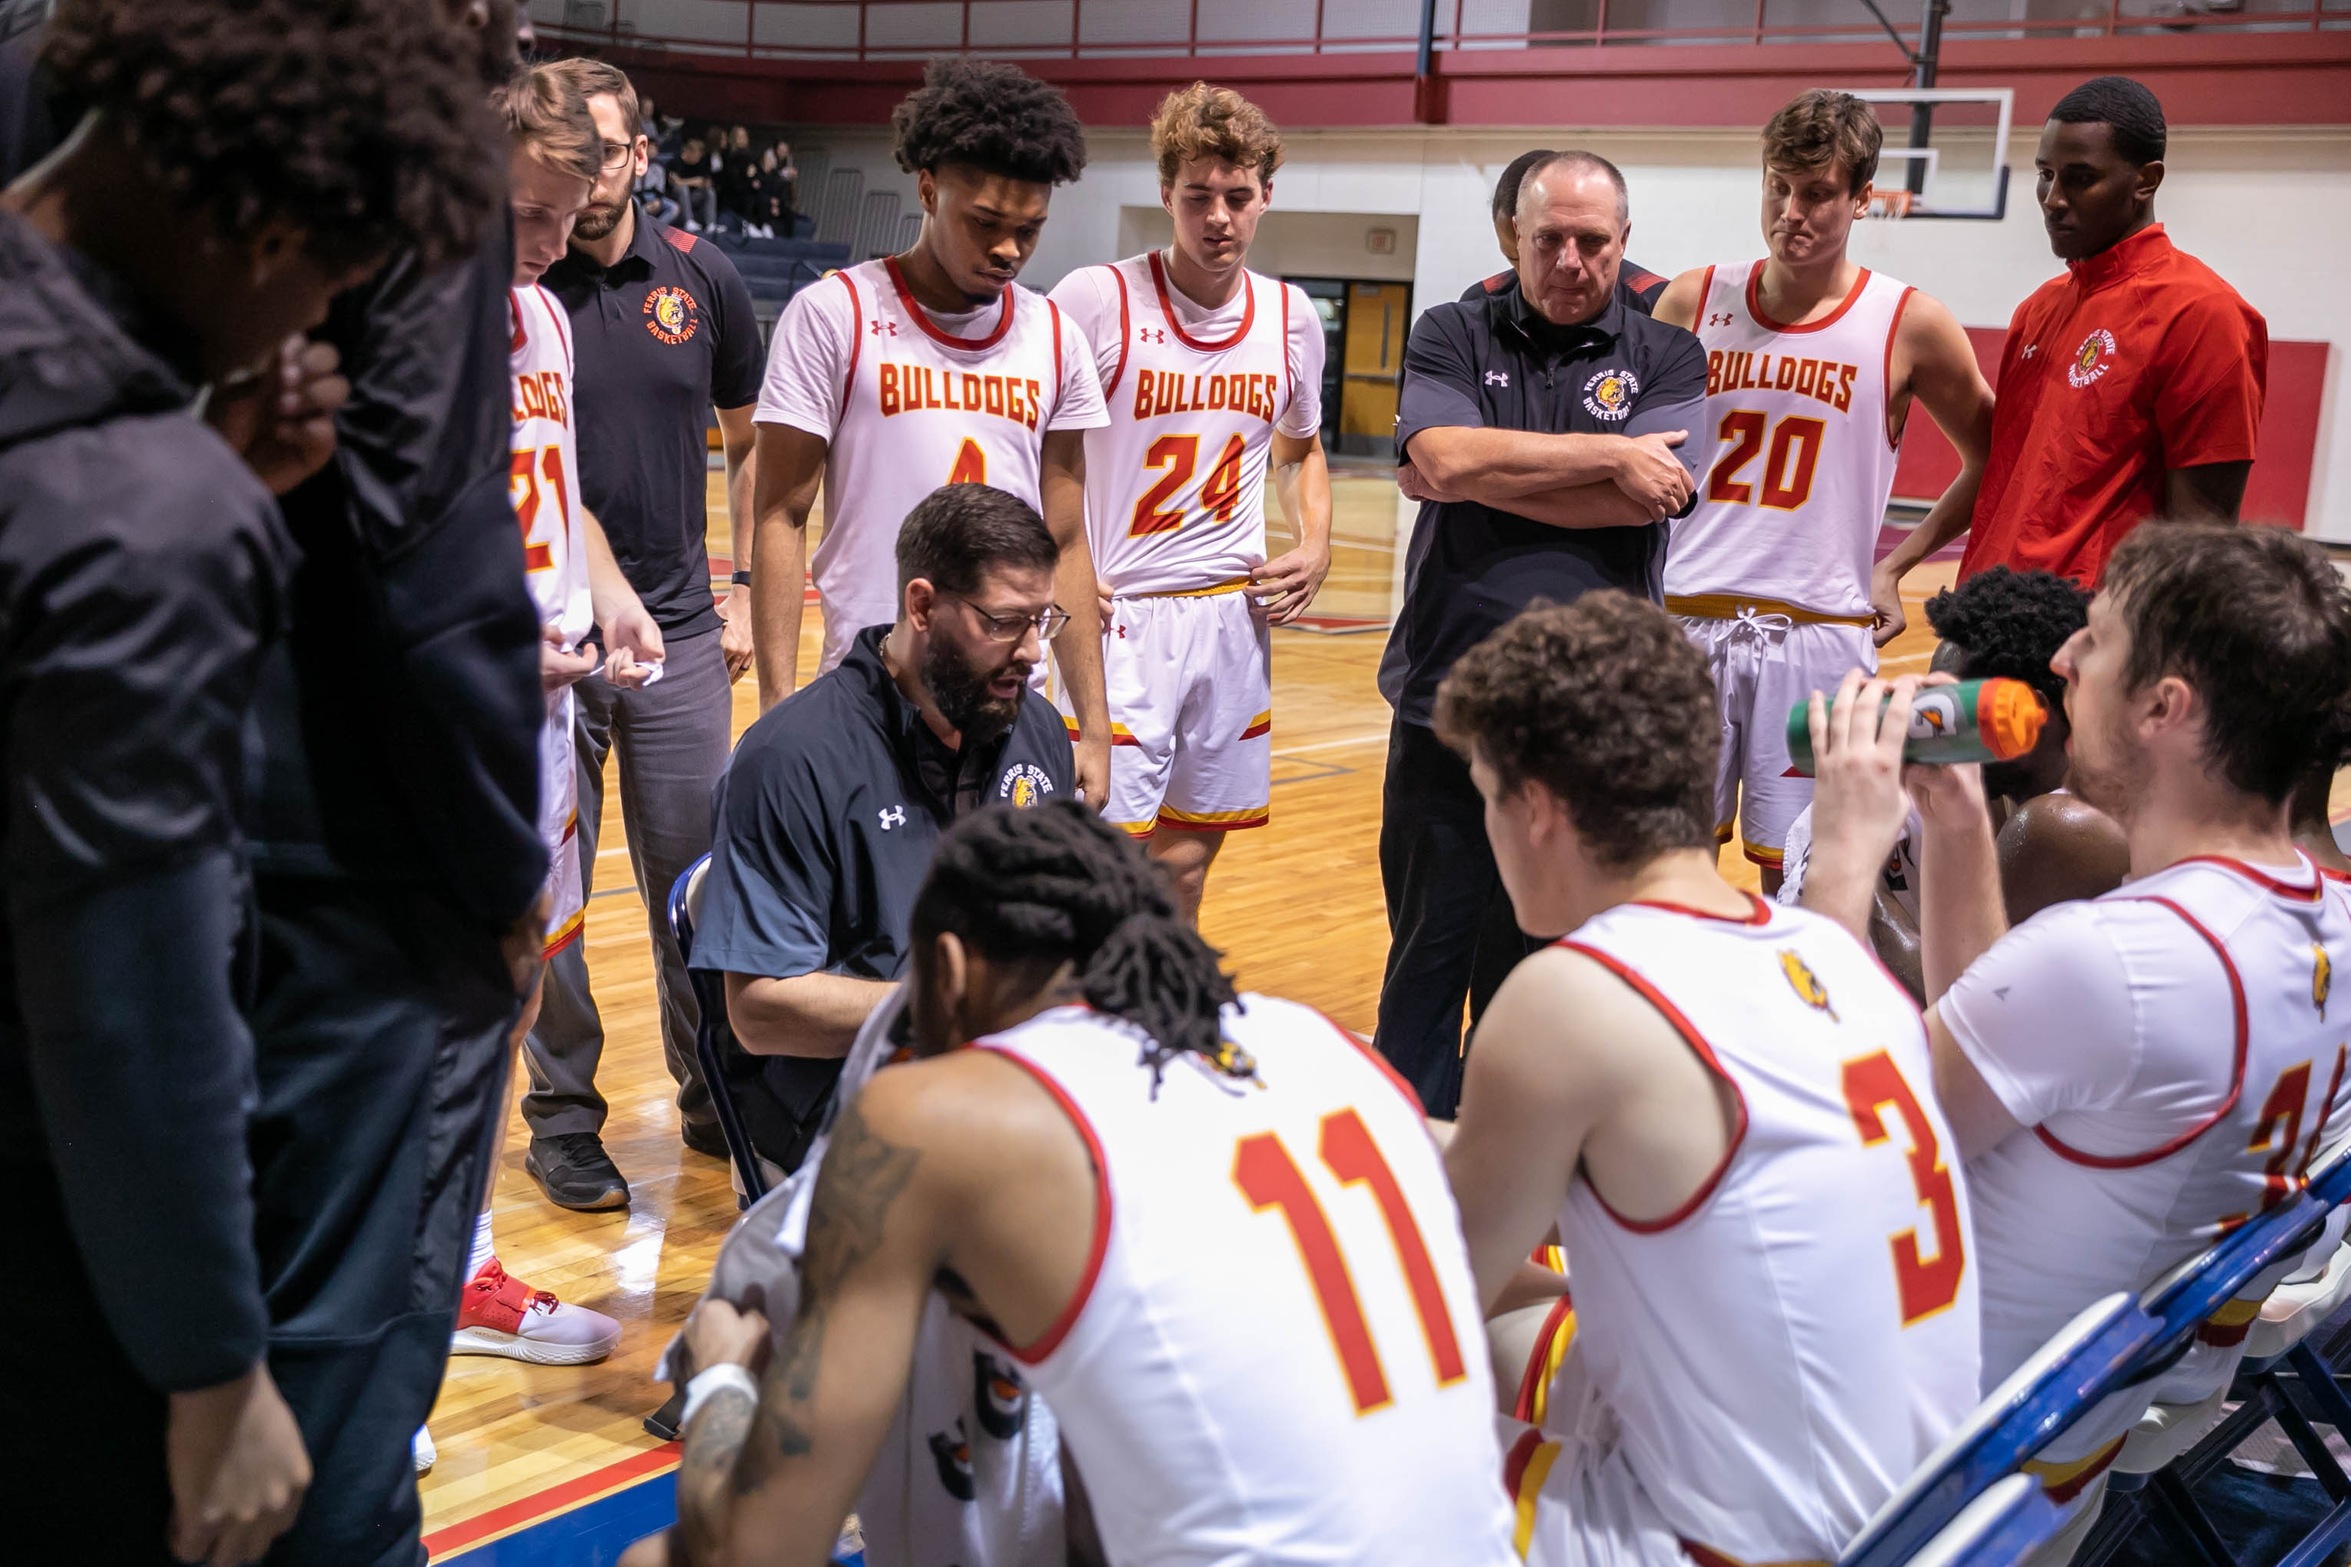 Ferris State Keeps Momentum Going With Big Second Half In League Victory